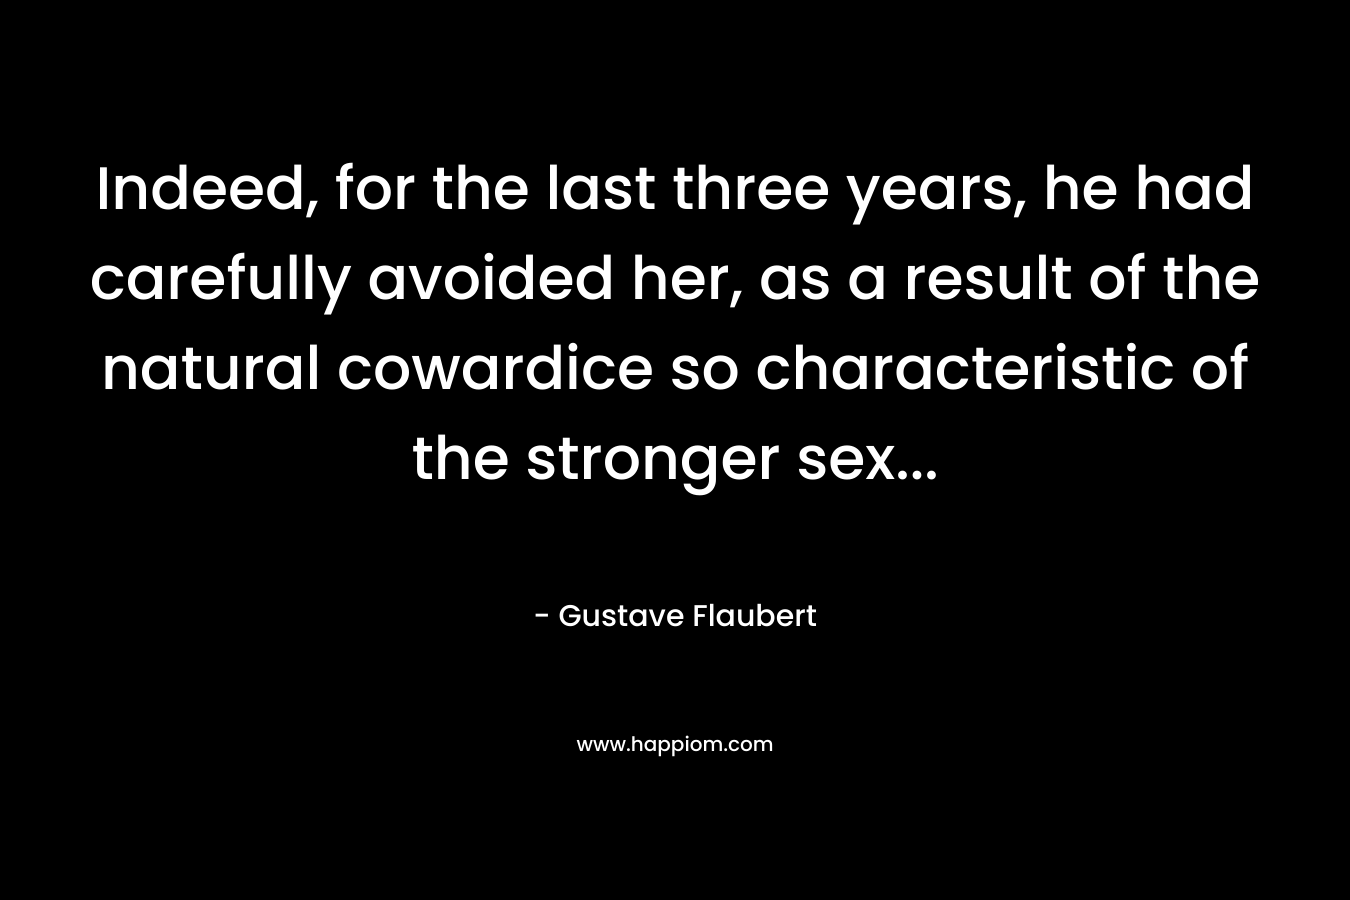 Indeed, for the last three years, he had carefully avoided her, as a result of the natural cowardice so characteristic of the stronger sex… – Gustave Flaubert